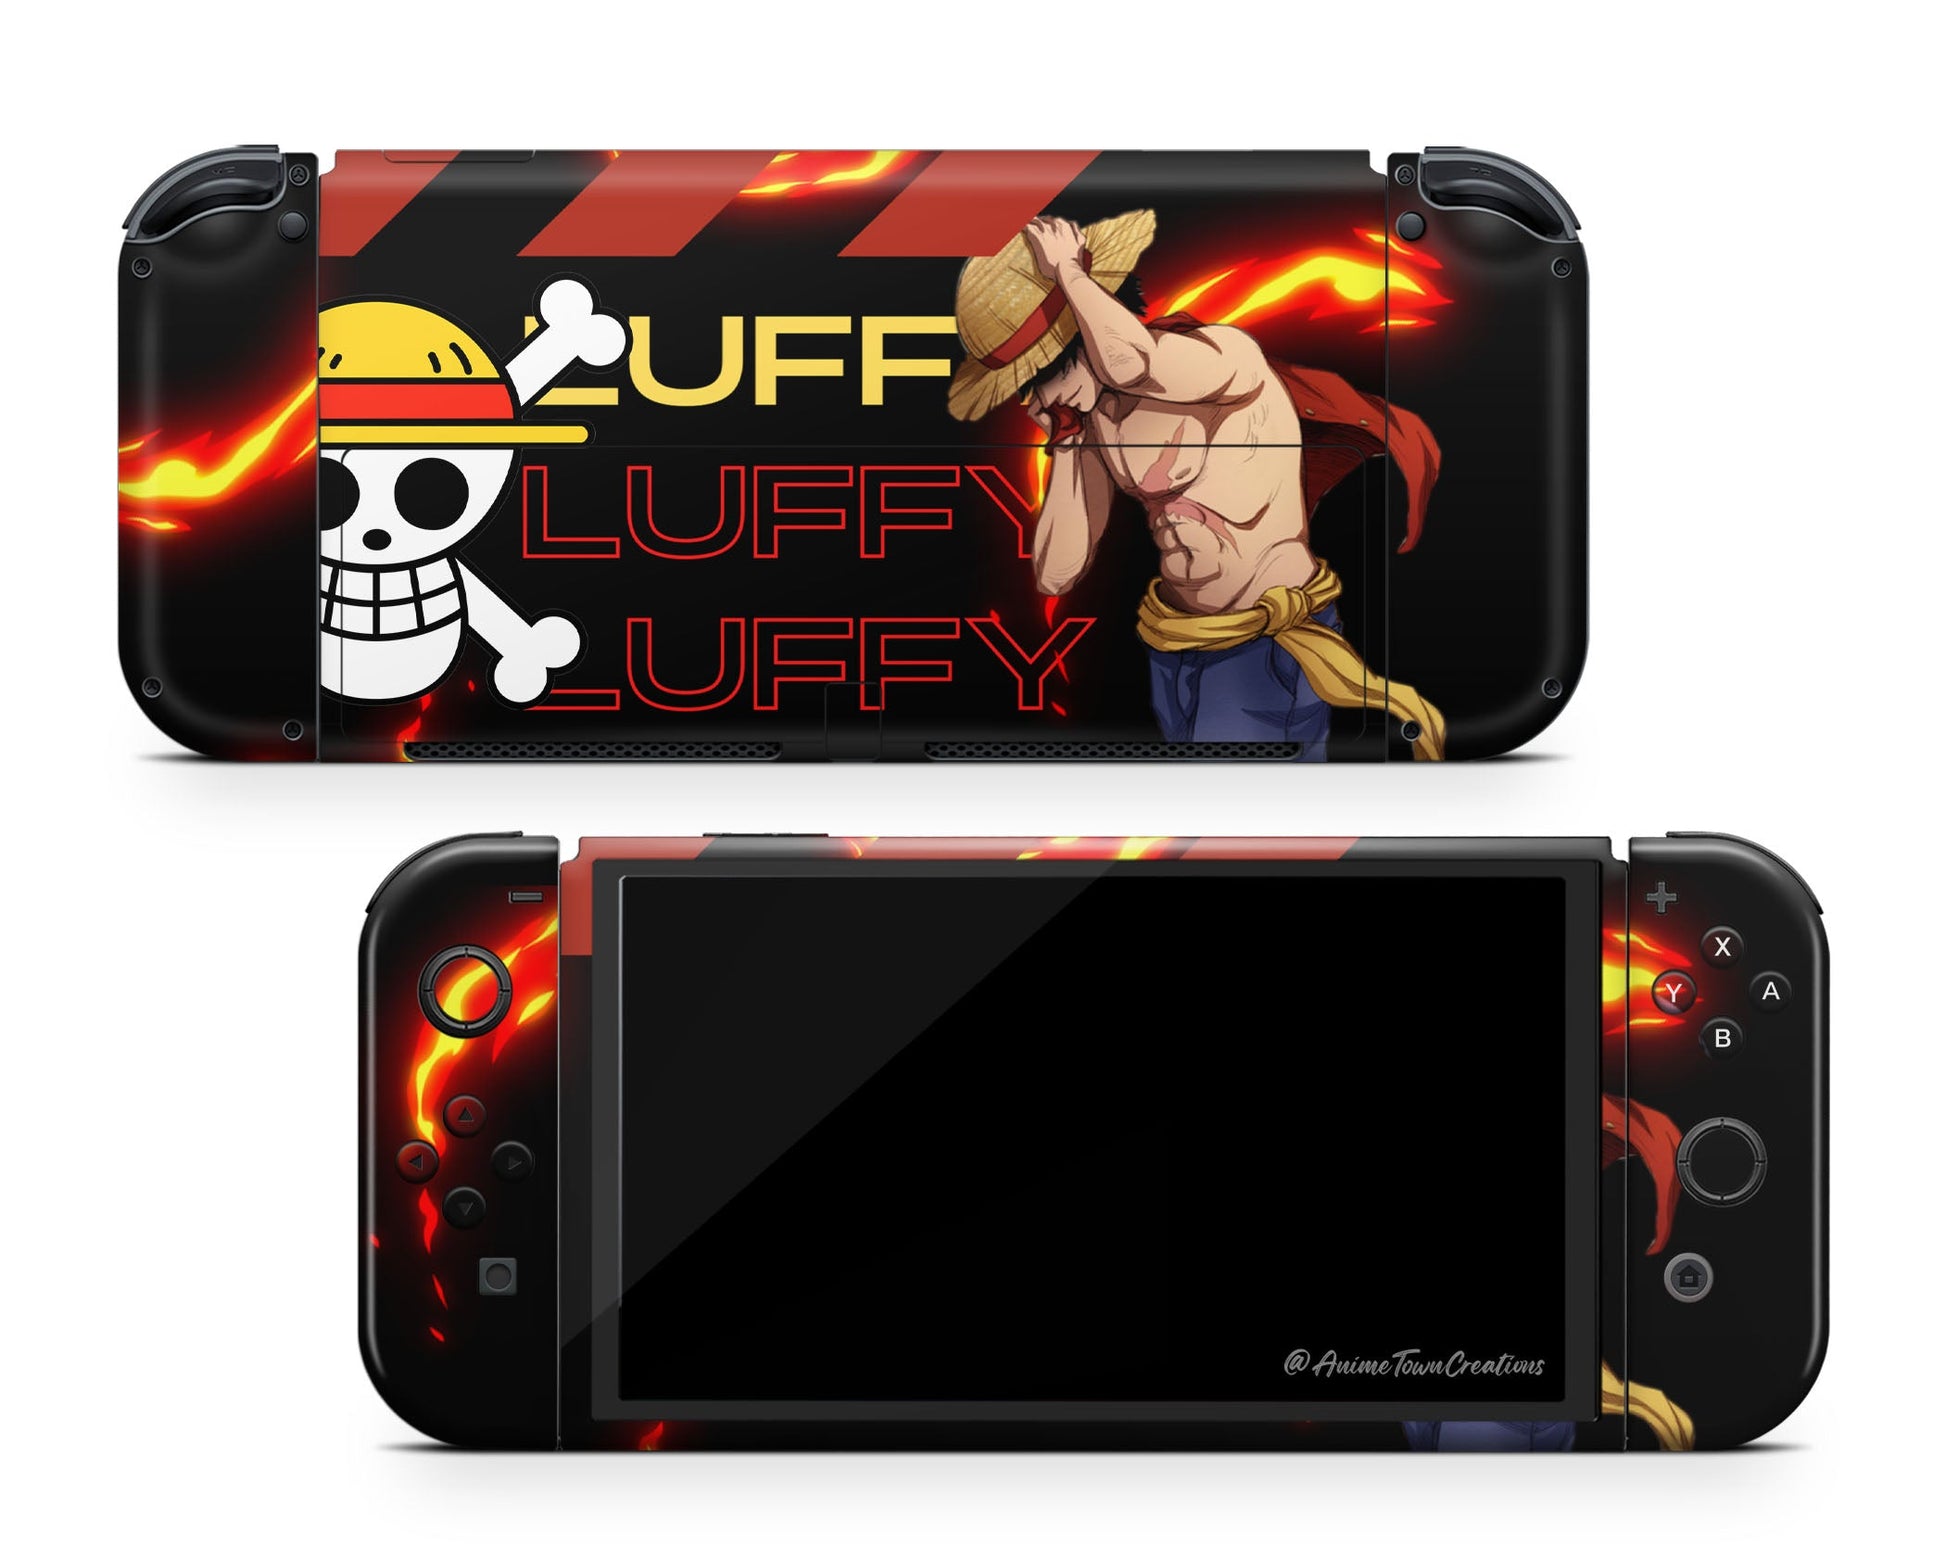 Anime Town Creations Nintendo Switch OLED One Piece Luffy Logo Vinyl only Skins - Anime One Piece Switch OLED Skin